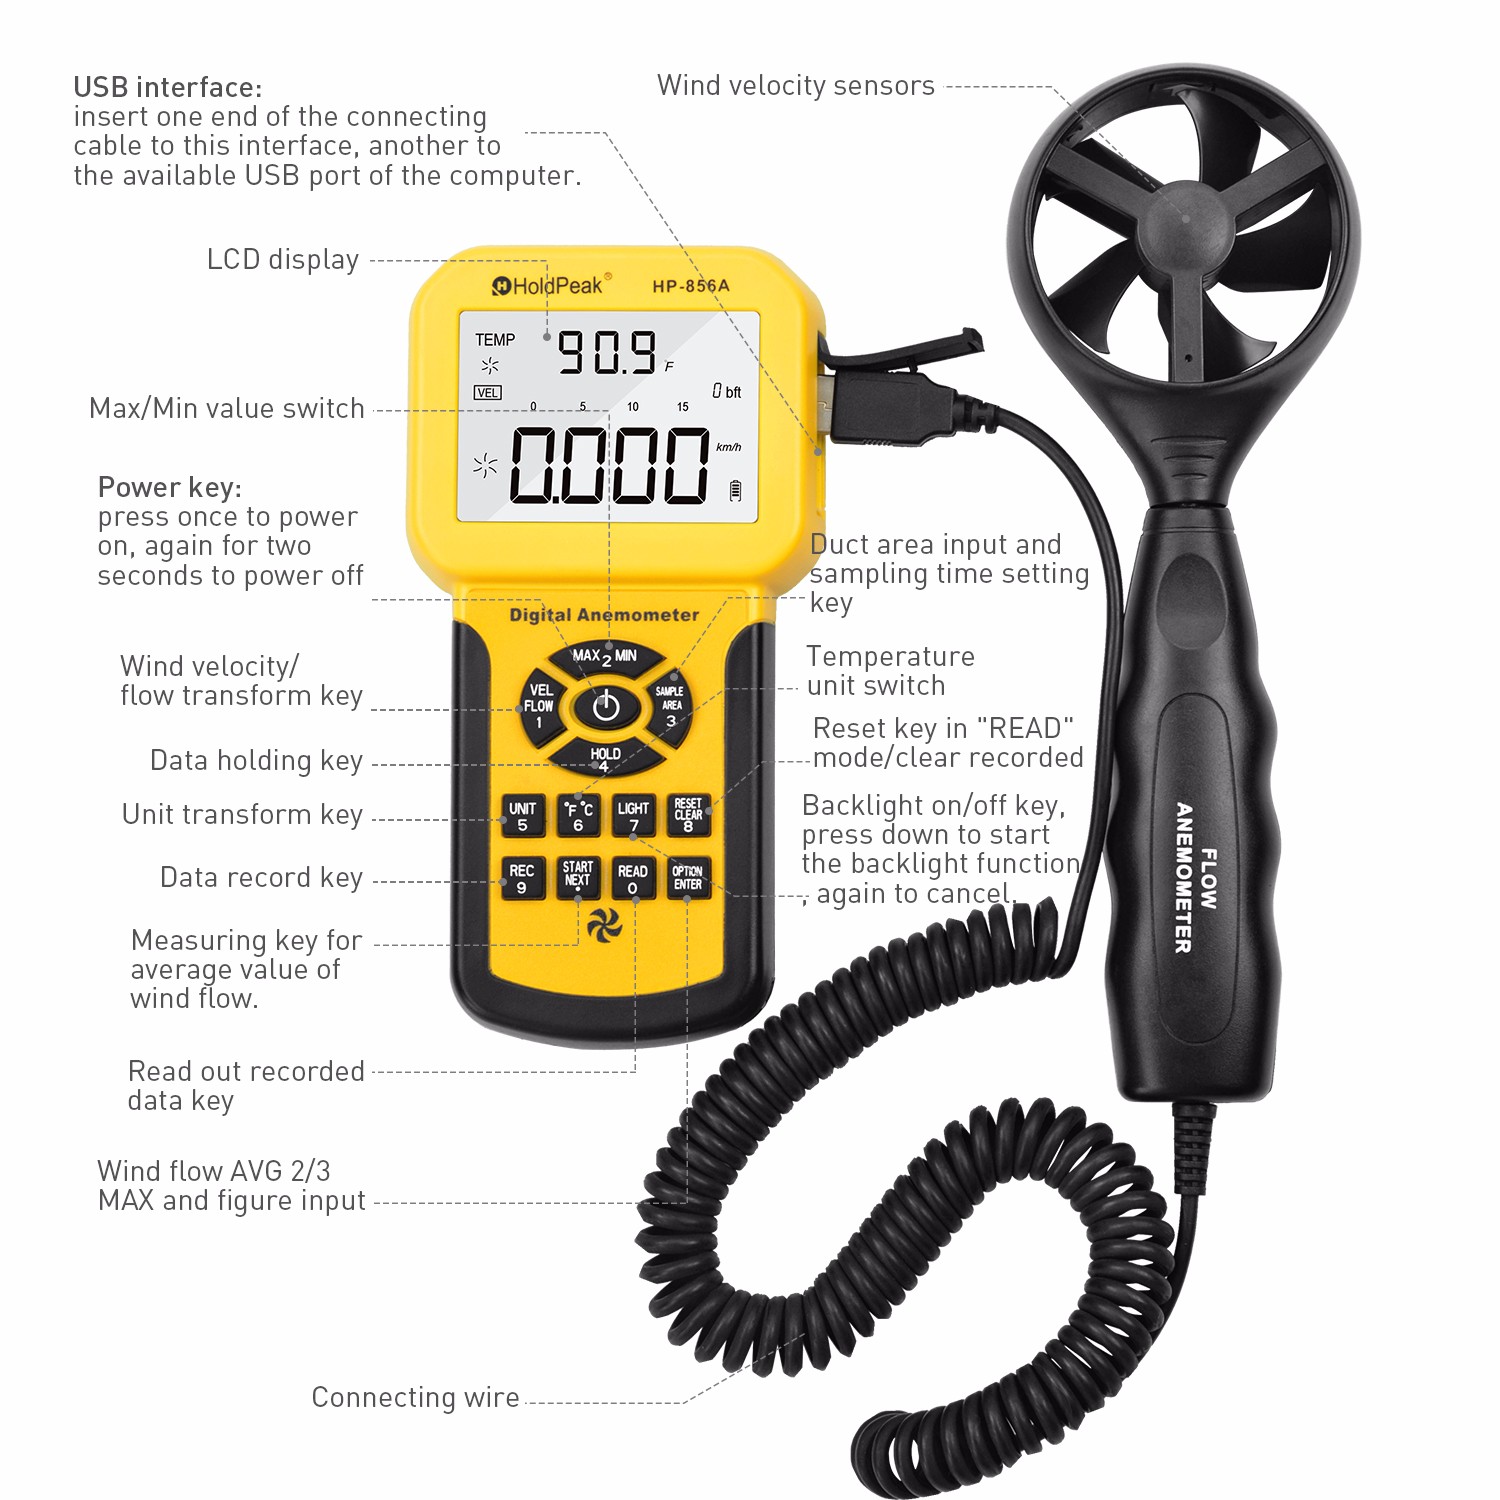 HoldPeak anemoscope remote anemometer company for tower crane